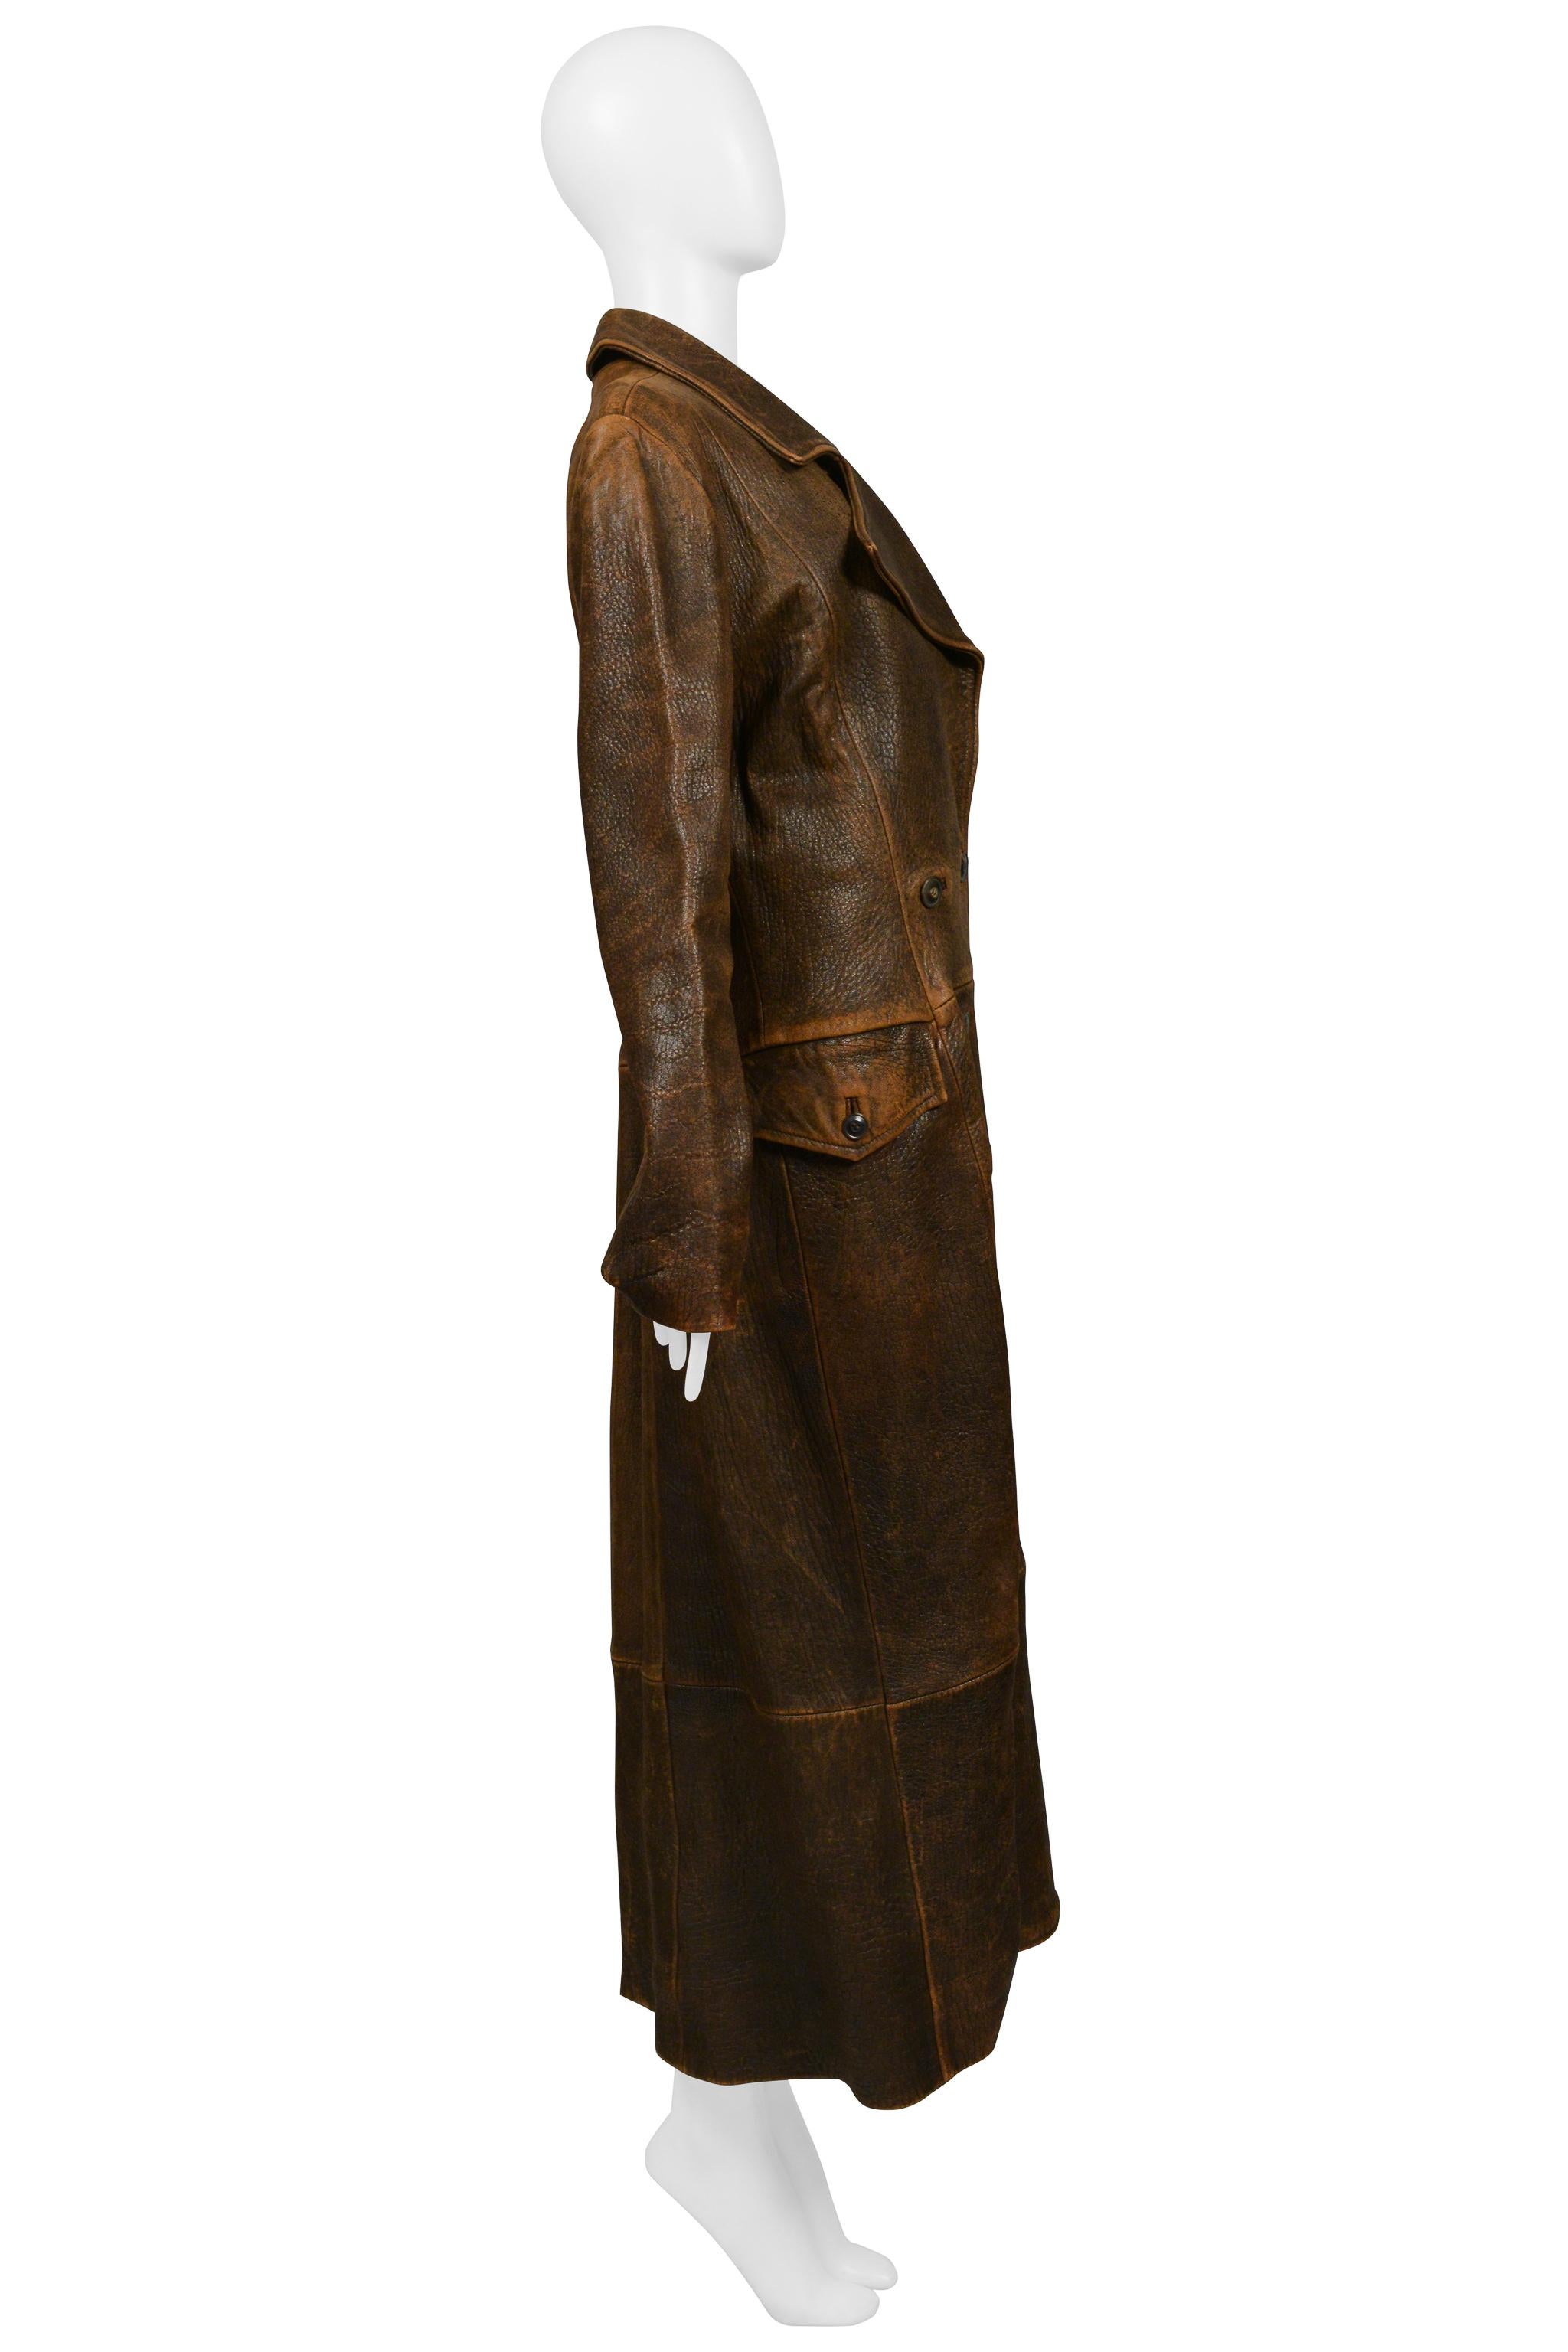 North Beach Leather Brown Distressed Duster For Sale 4